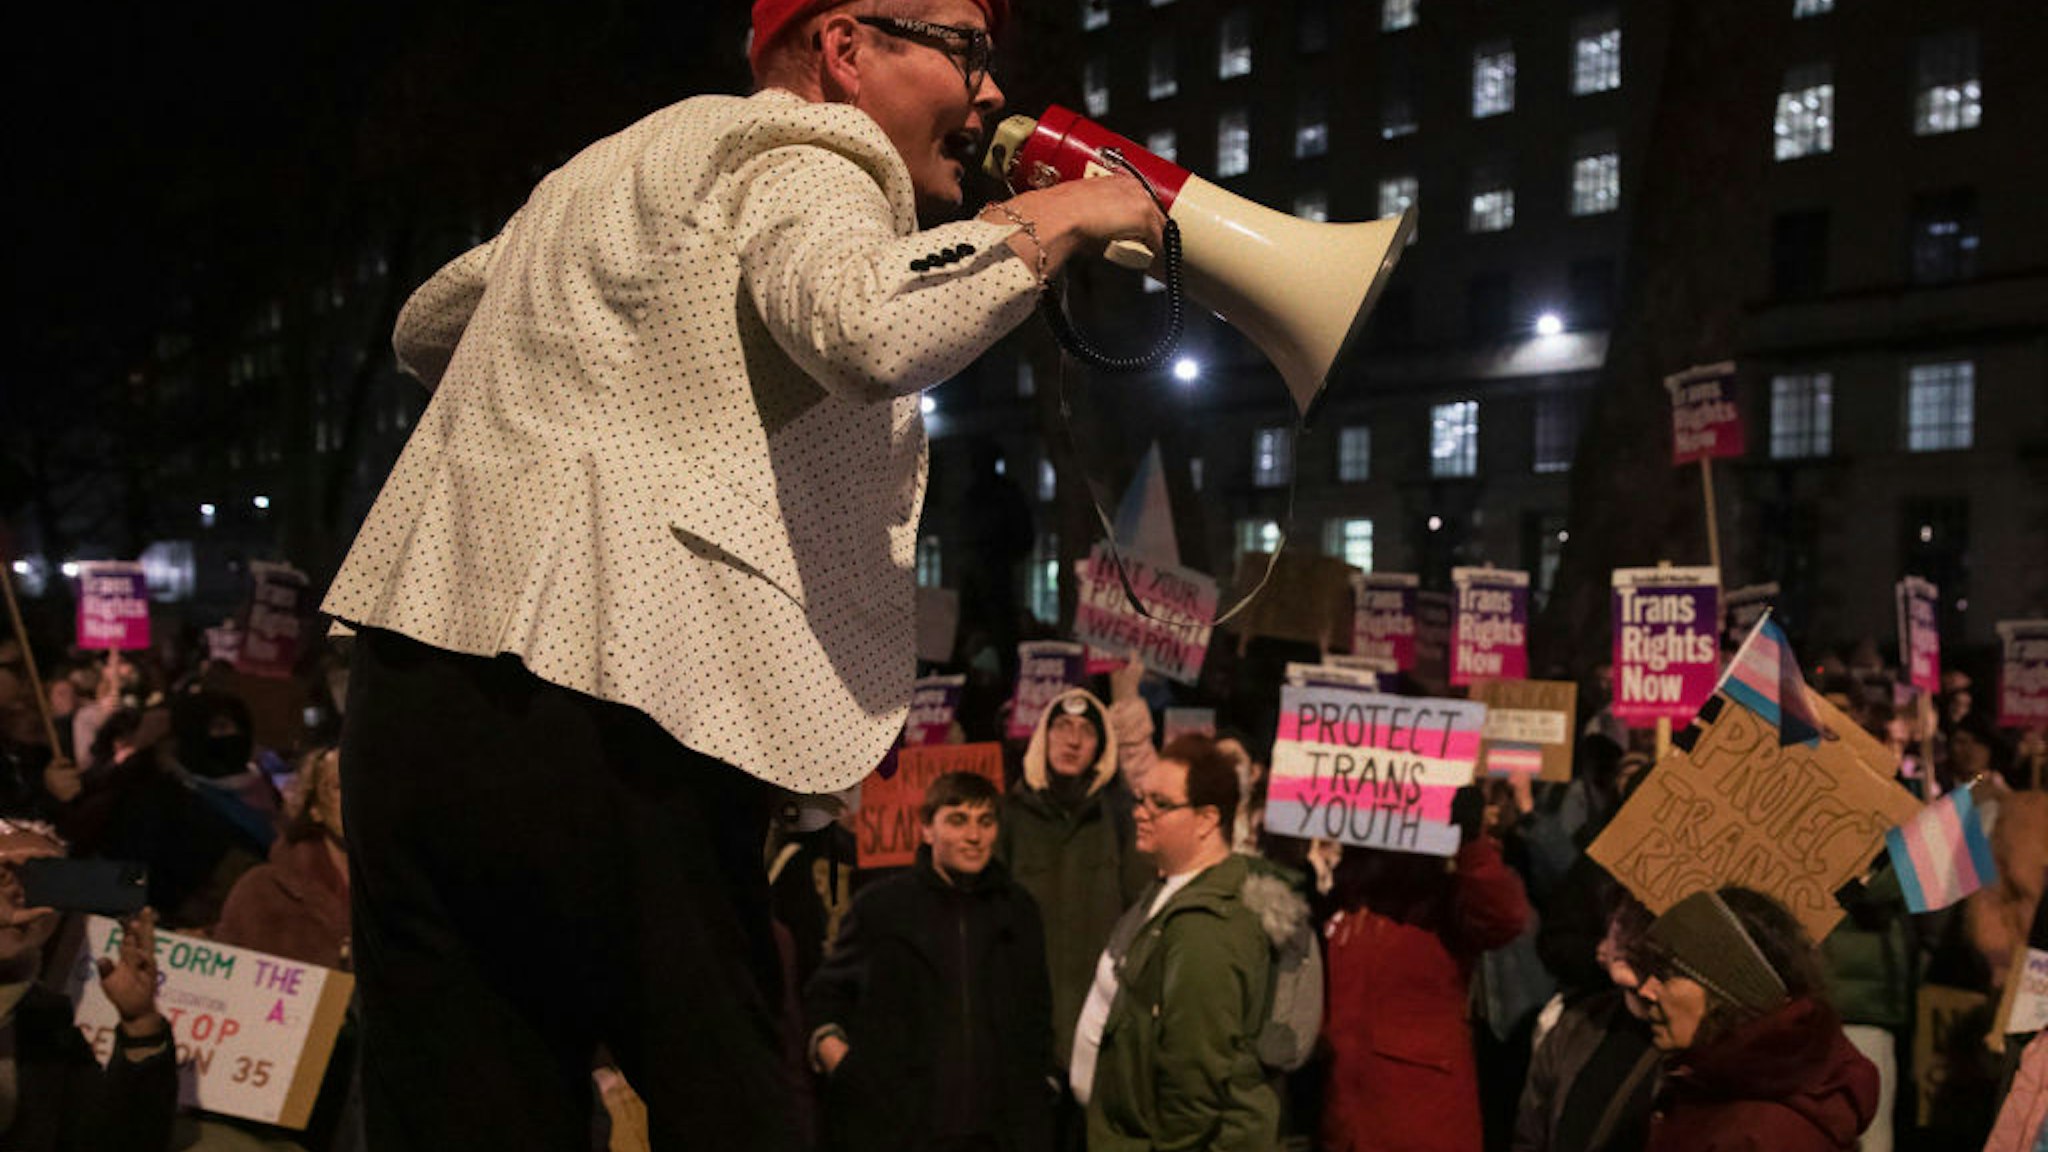 Sarah Jane Baker addresses trans people at an emergency protest opposite Downing Street on 18 January 2023 in London, United Kingdom. The protest, attended by around a thousand people, was organised at short notice by London Trans Pride following the UK government's decision to use Section 35 of the Scotland Act to block Scotland's Gender Recognition Reform Bill which would have made it easier for trans people to obtain a Gender Recognition Certificate (GRC) in Scotland. (photo by Mark Kerrison/In Pictures via Getty Images)